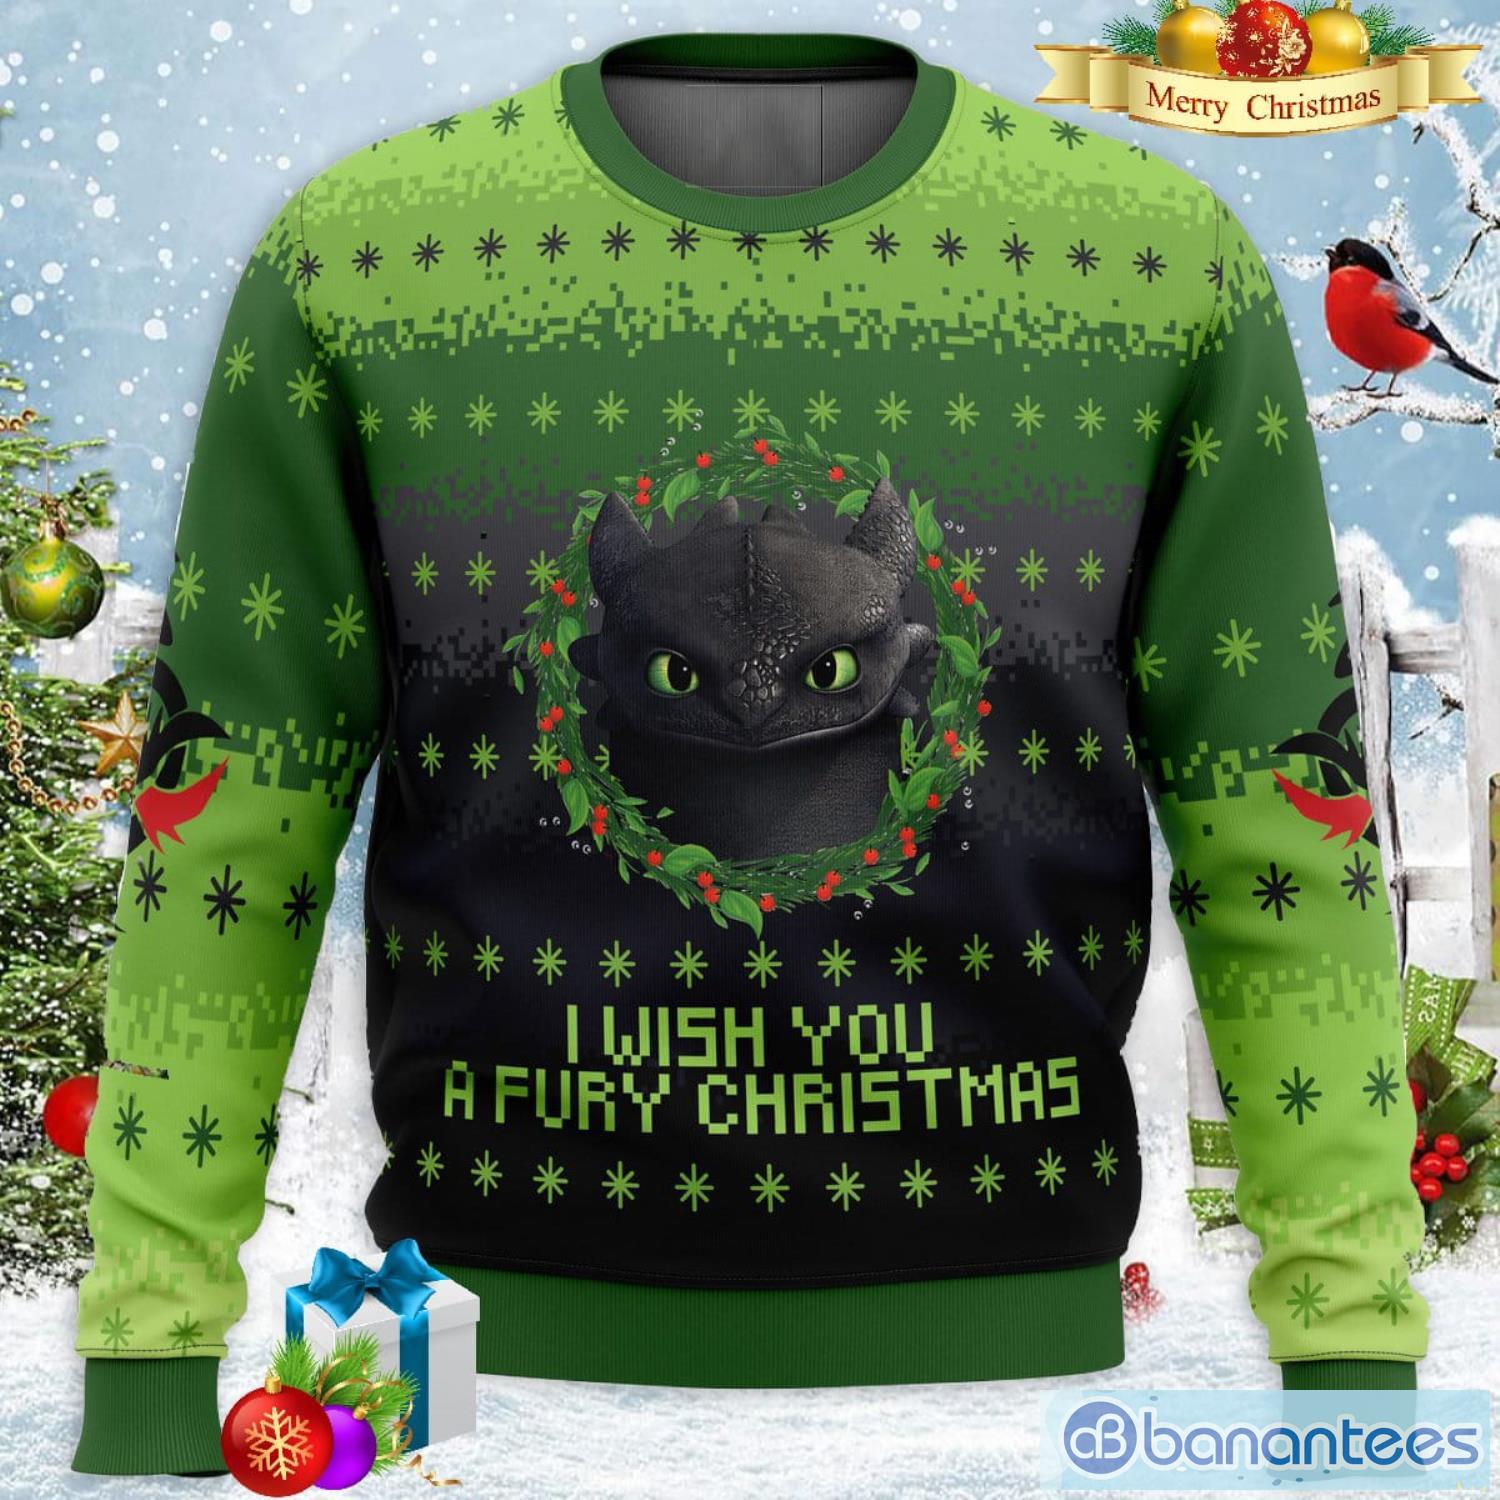 Grinch People Ugly Christmas Sweater For Men Women - Banantees